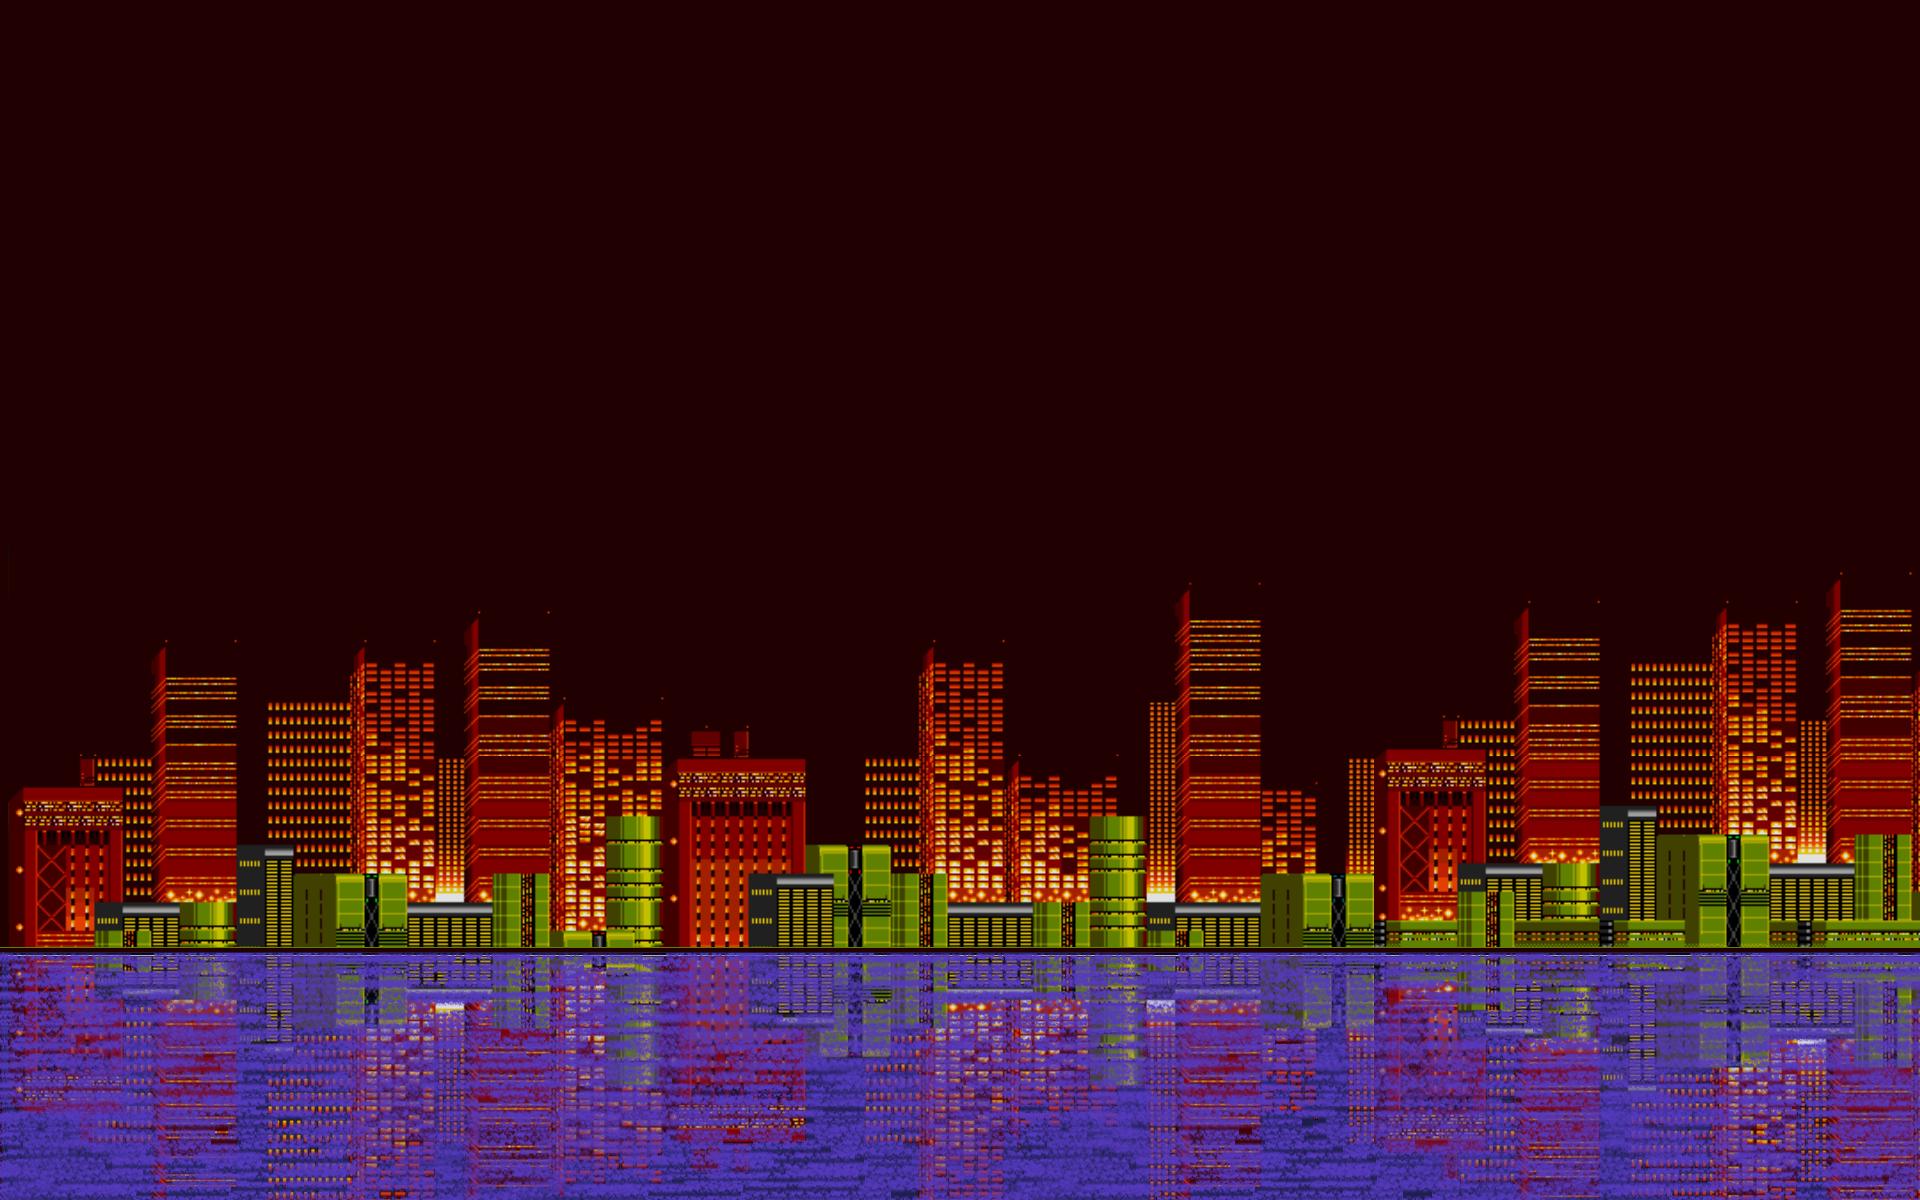 Looking for some Sonic3&K wallpaper